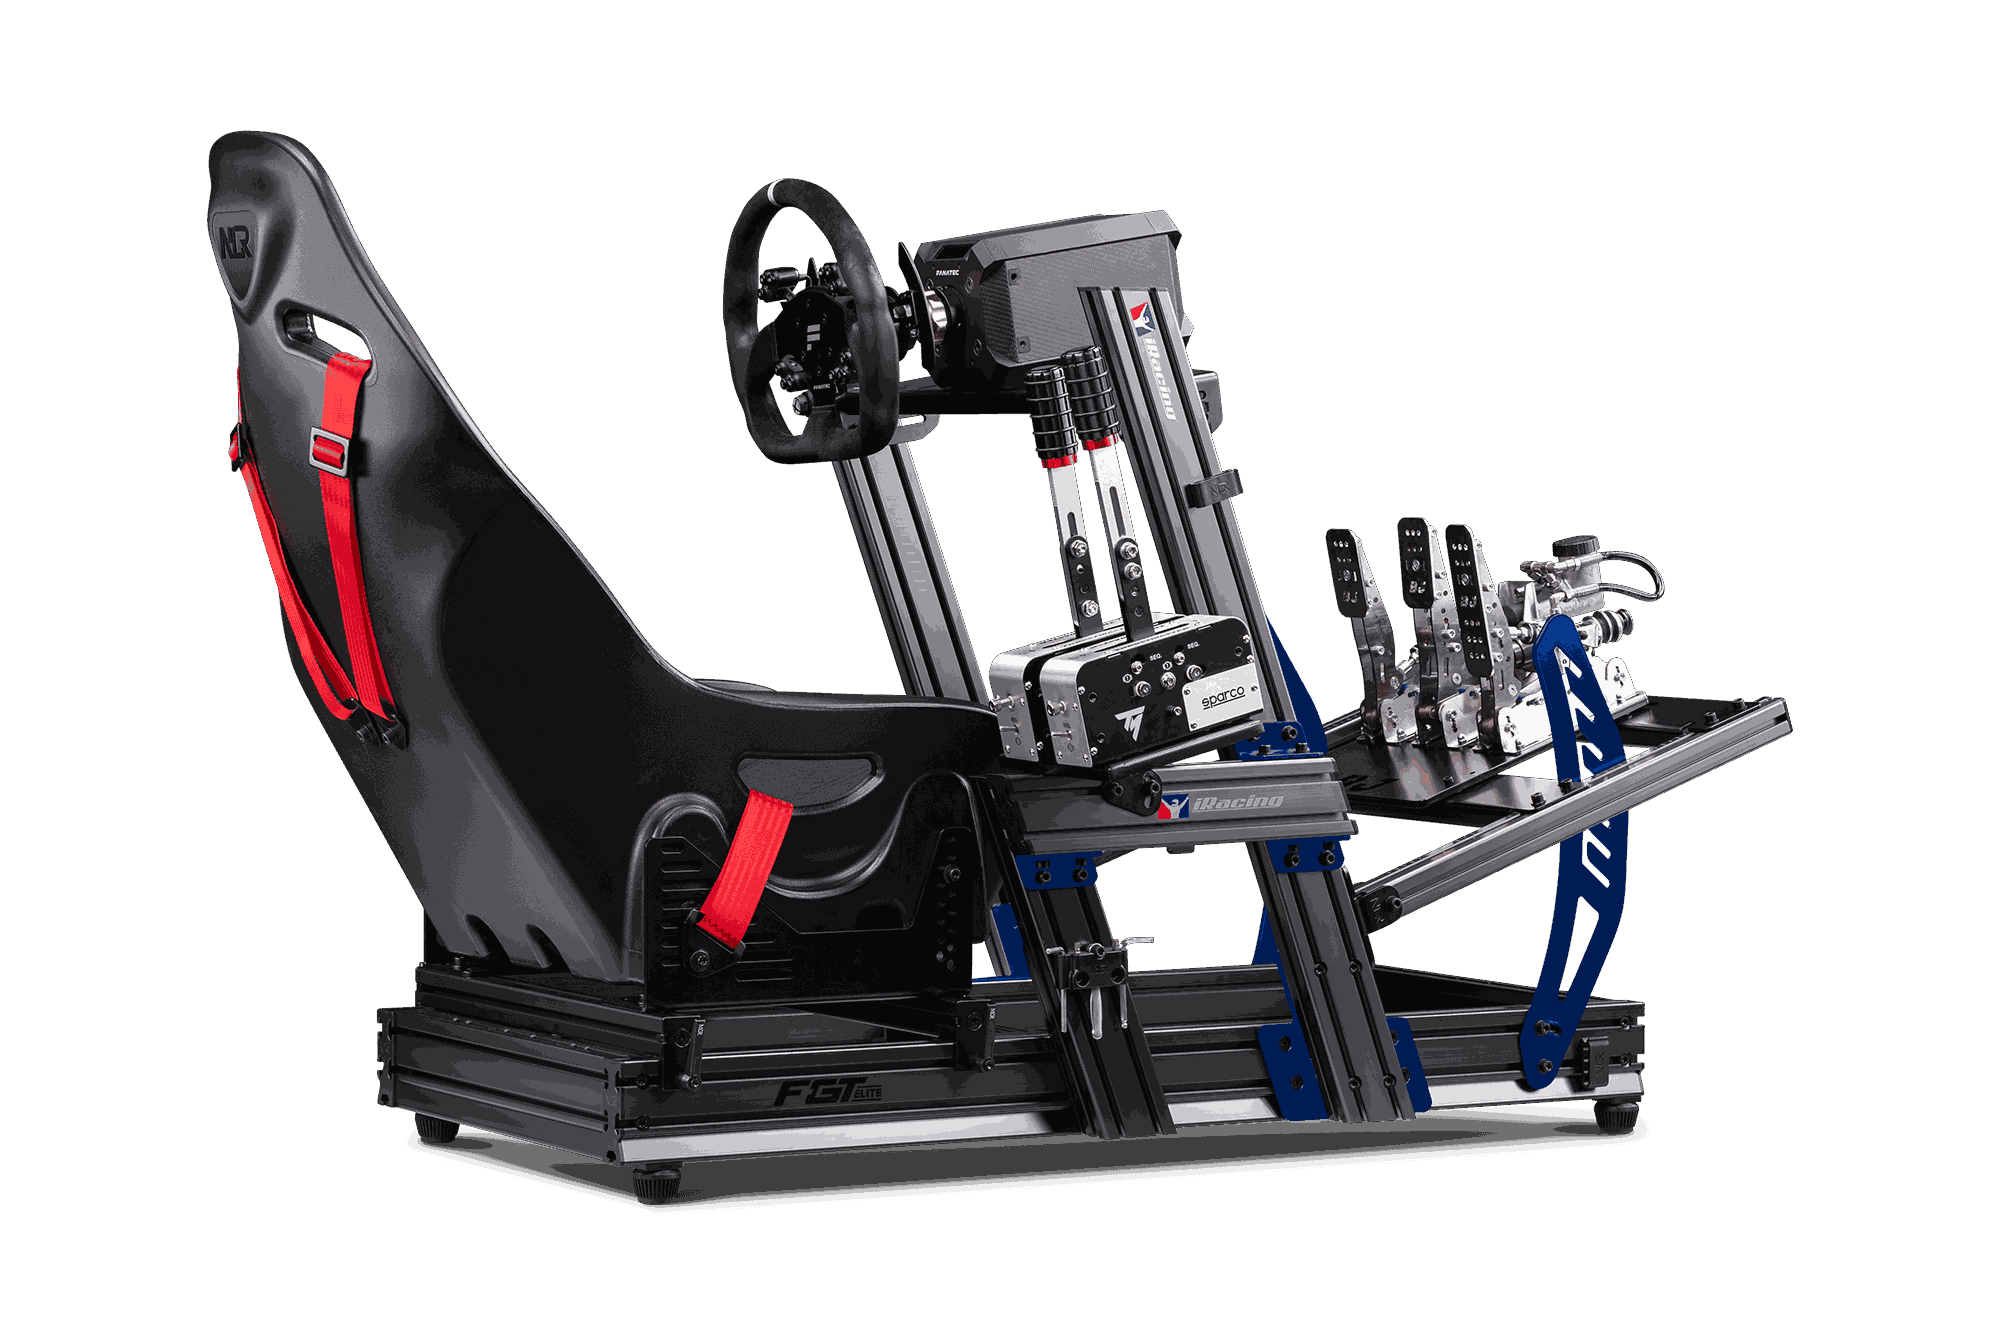 Level racing. Next Level Racing. Next Level Racing traction Plus Motion Plattform. Racing Level. Next Level Racing Driving Force Shifter Lite Review.